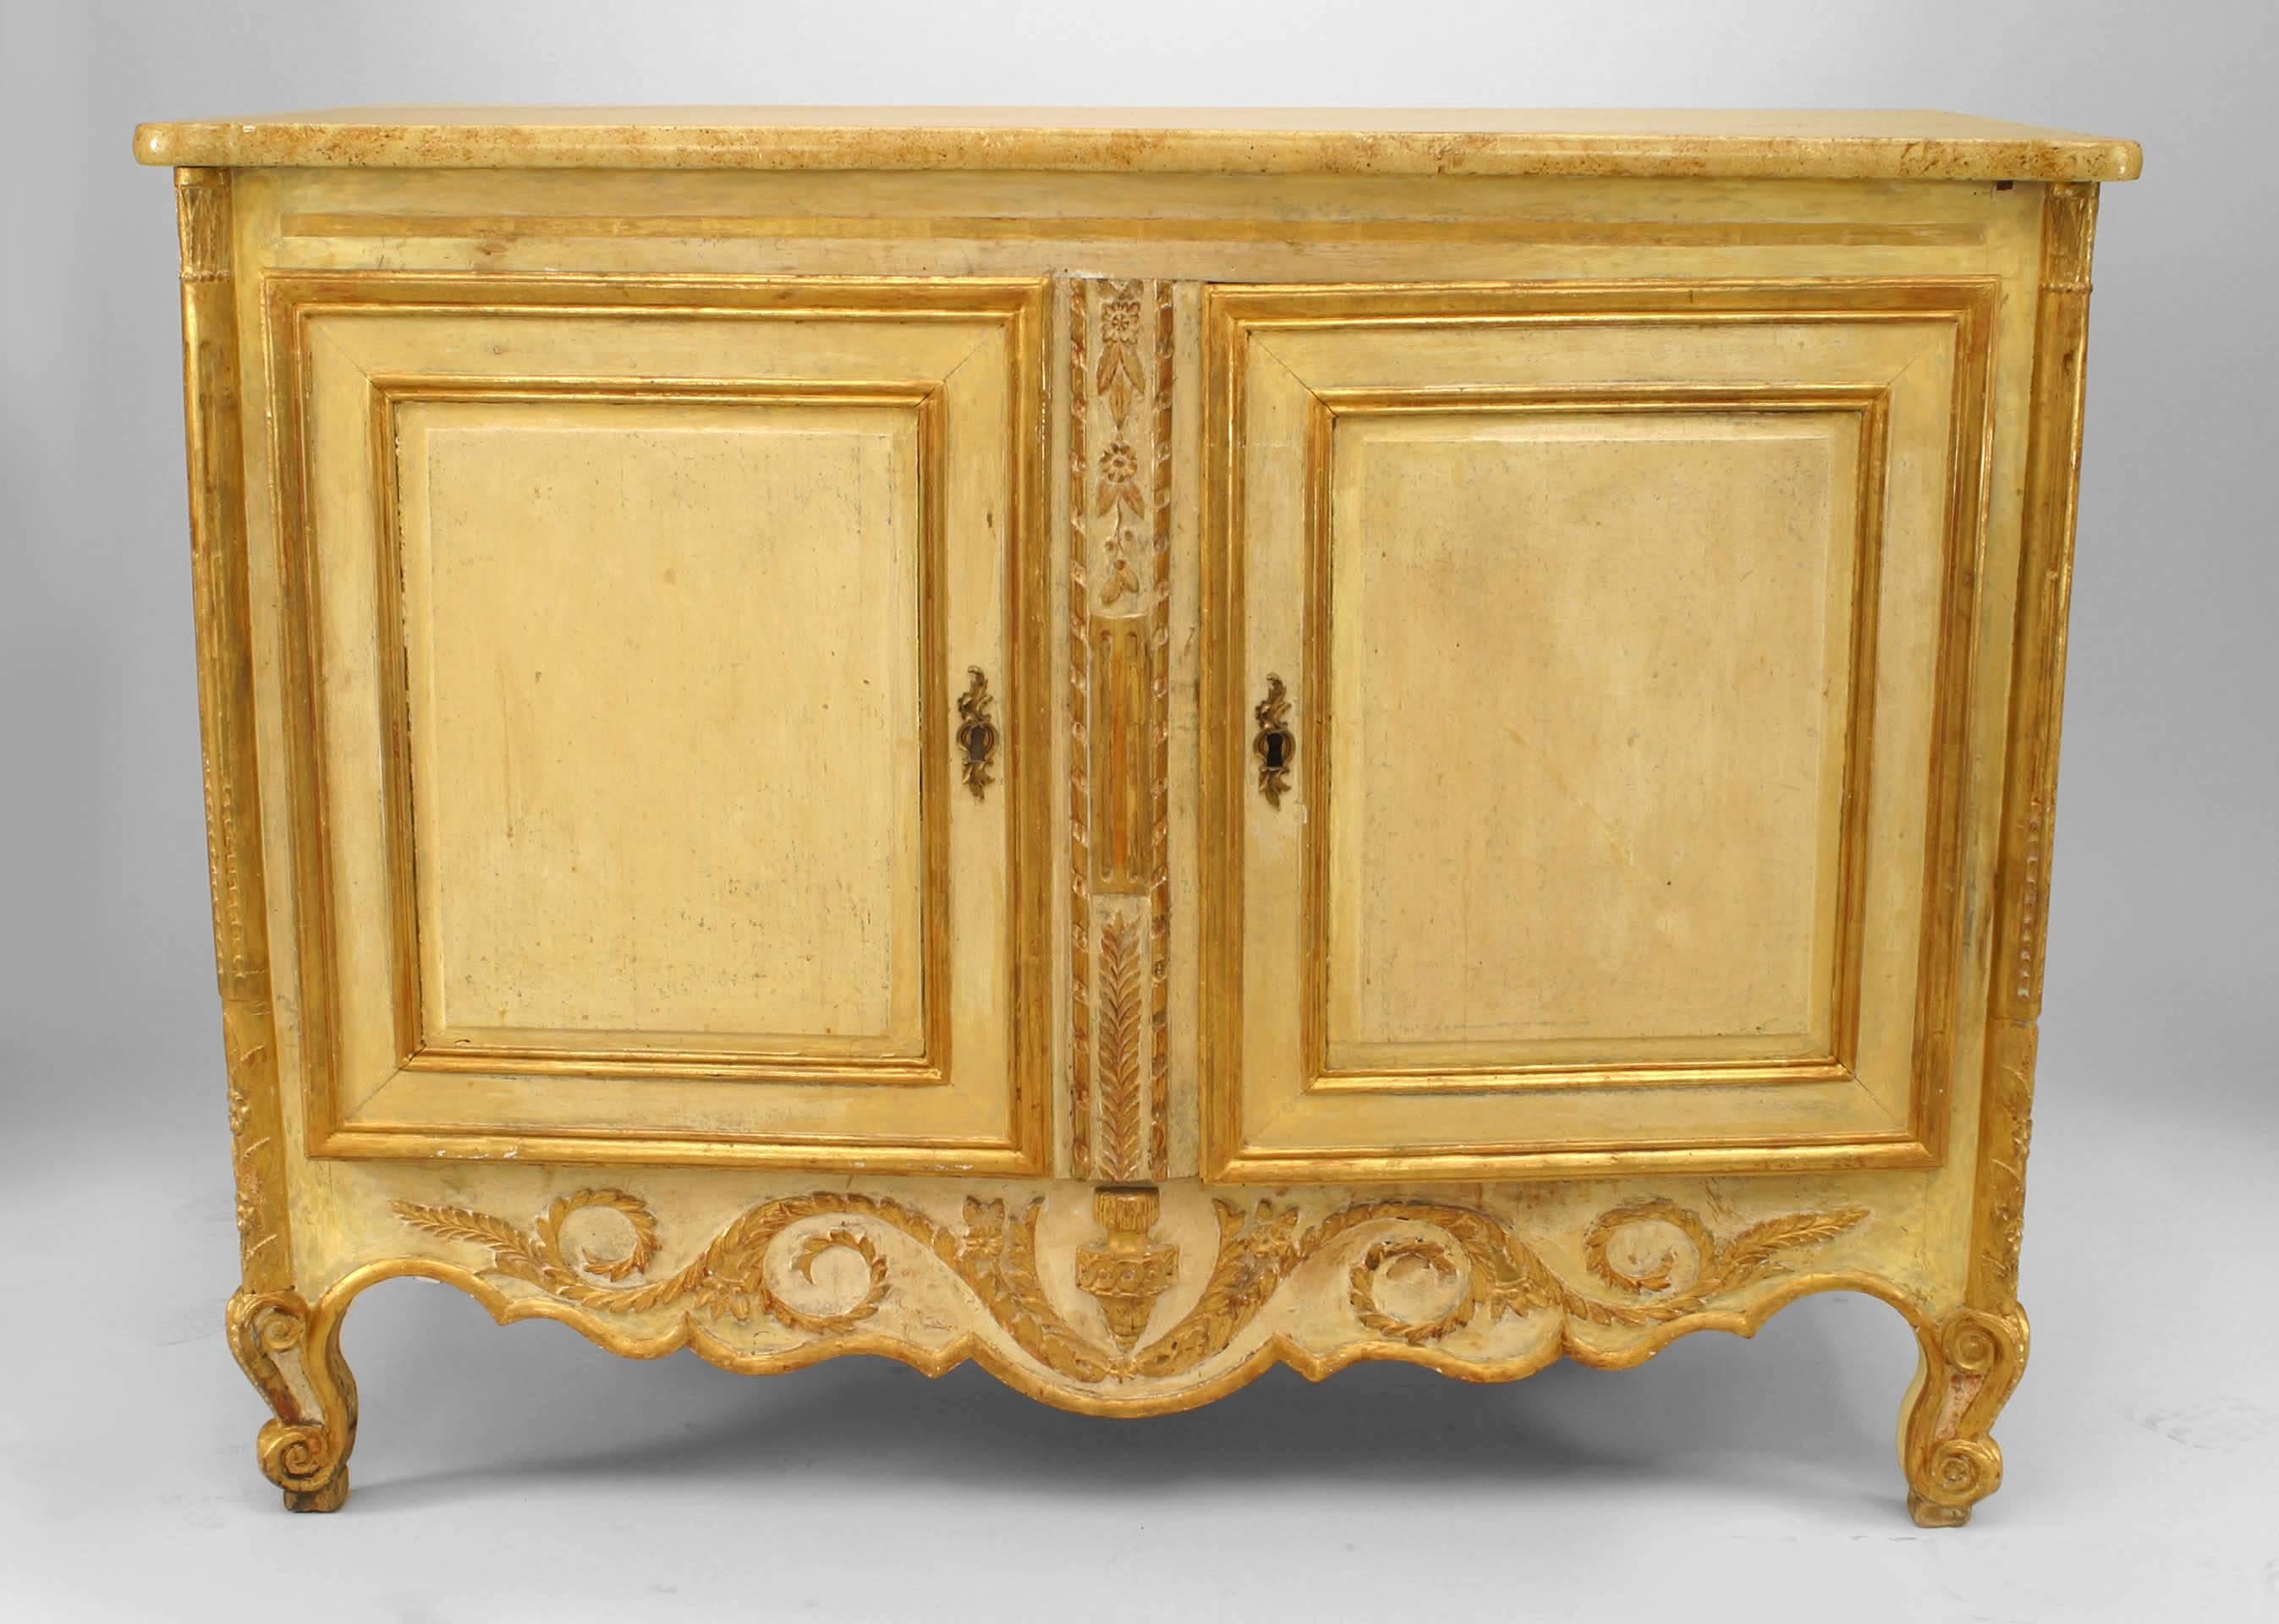 Italian Venetian style (18/19th Century with 20th top) two-door chest/commode having a refreshed off-white painted finish with foliate gilt details on cabriole leg with a faux marble top.
